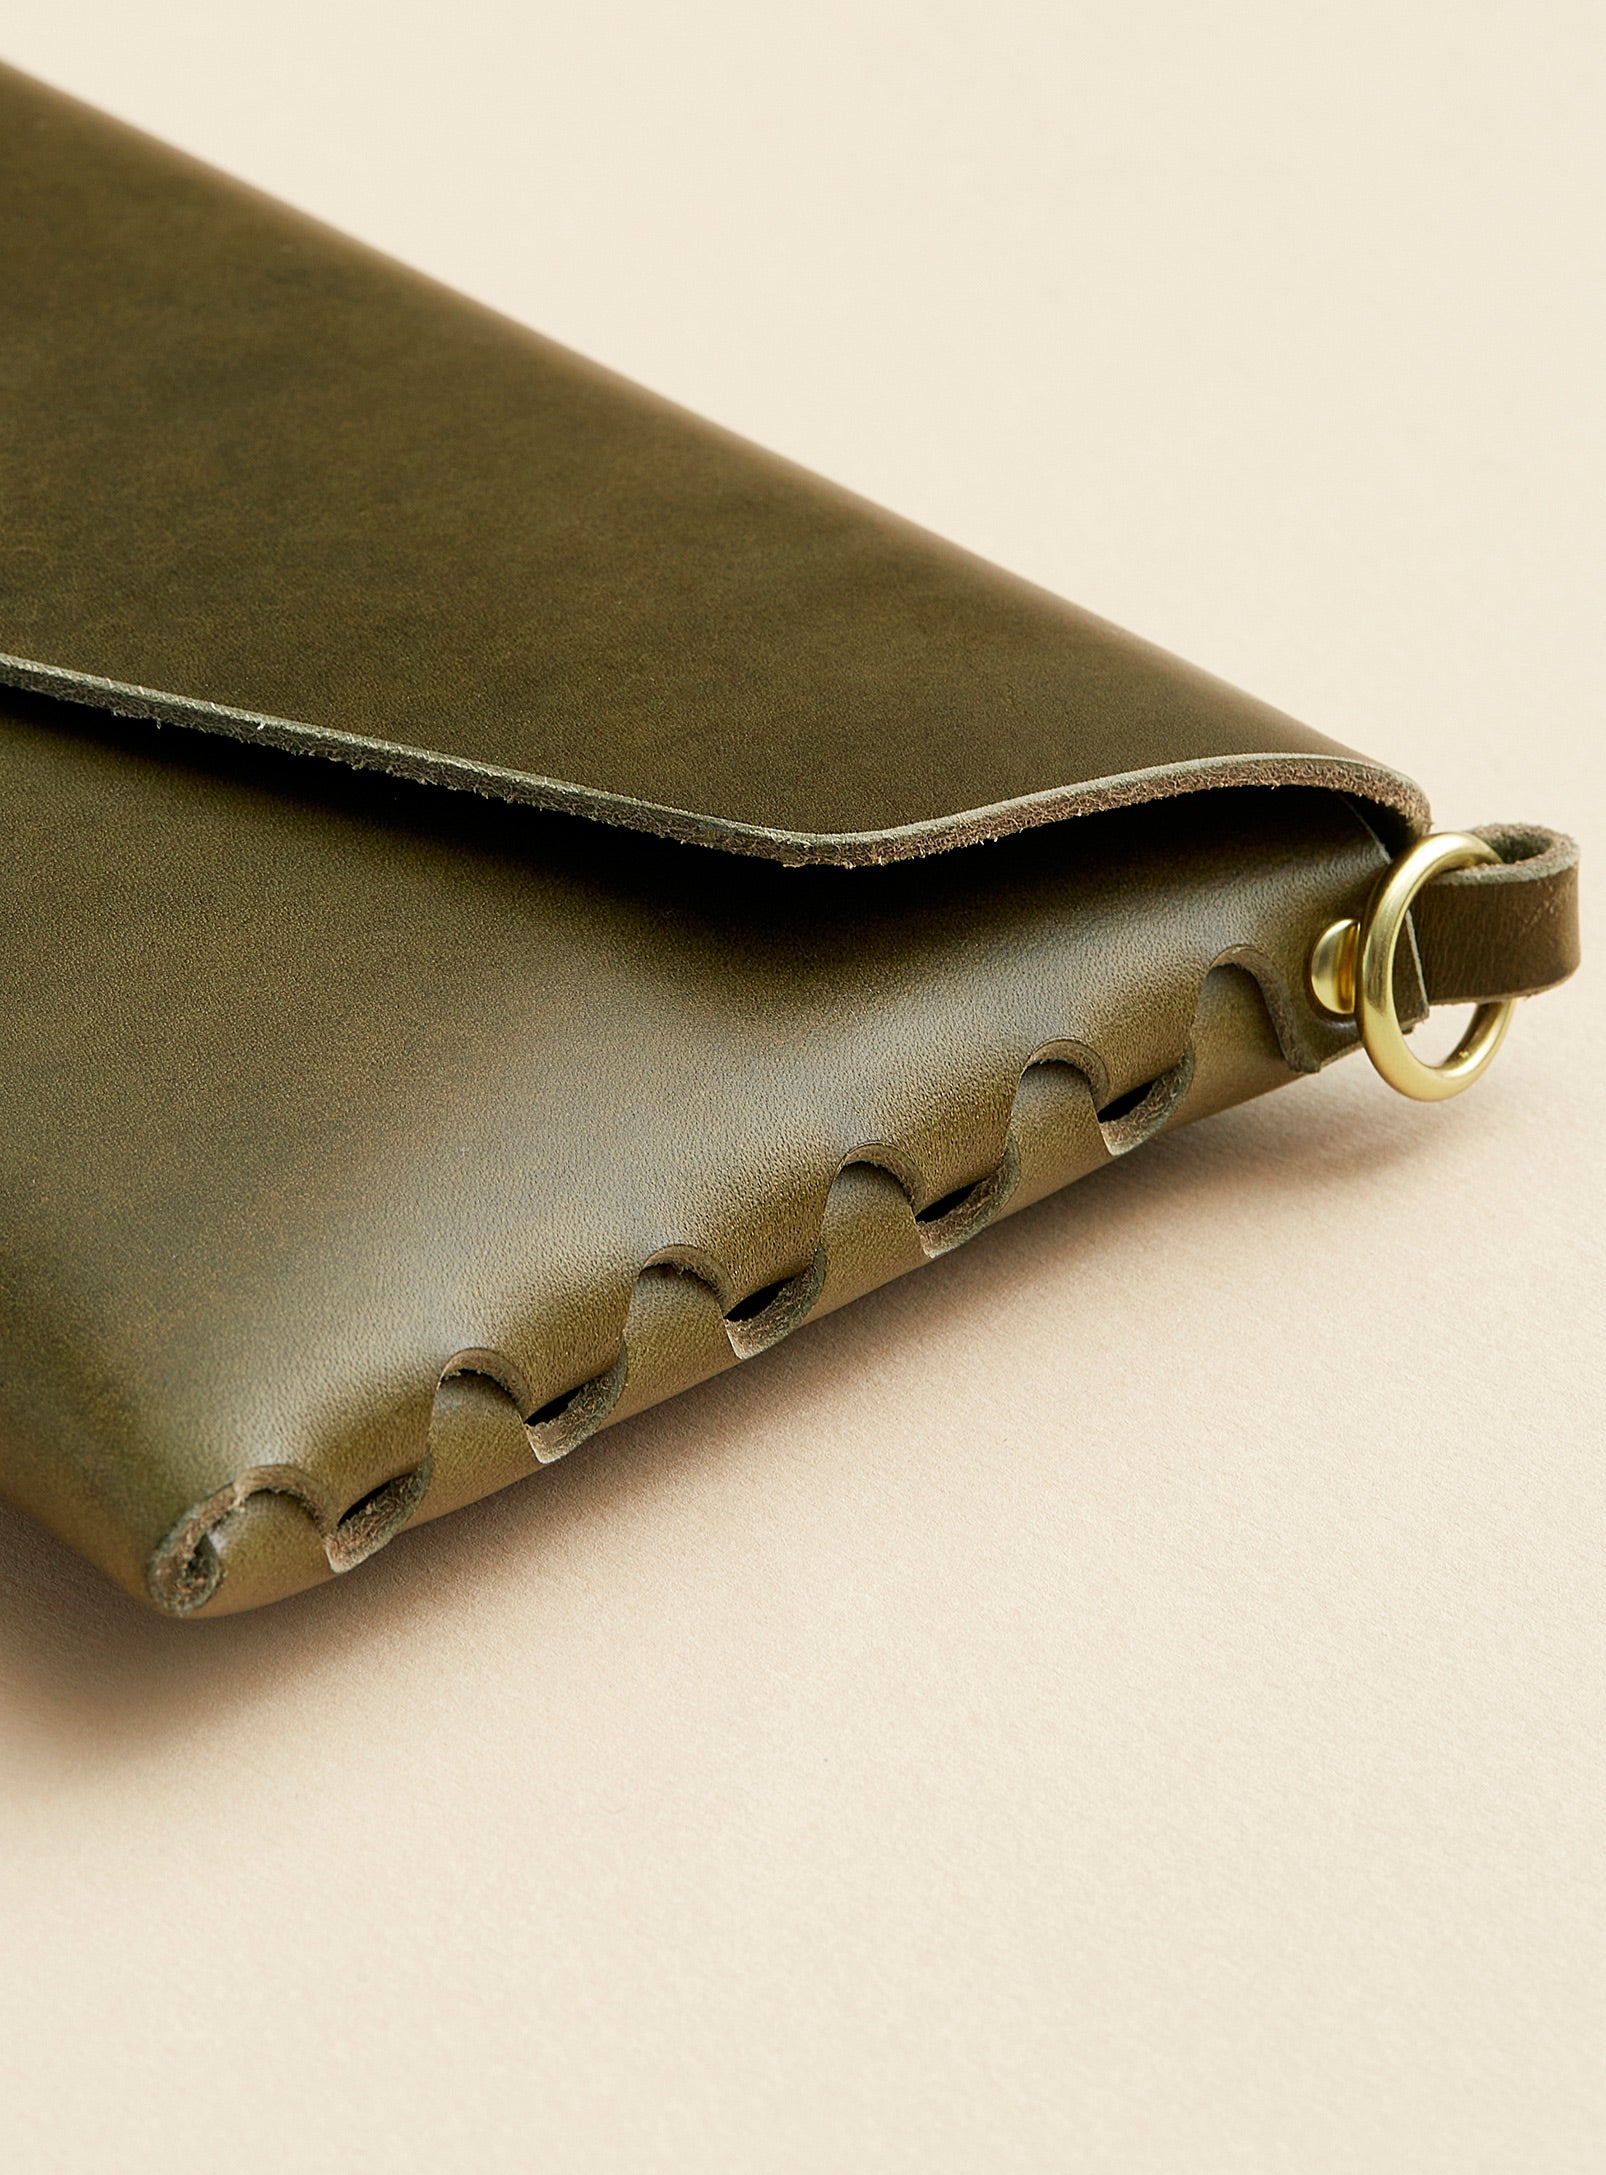 A close-up of modjūl's signature joinery on the leather mini bag in olive. Handmade in Canada using vegetable dyed leather and quality brass hardware.